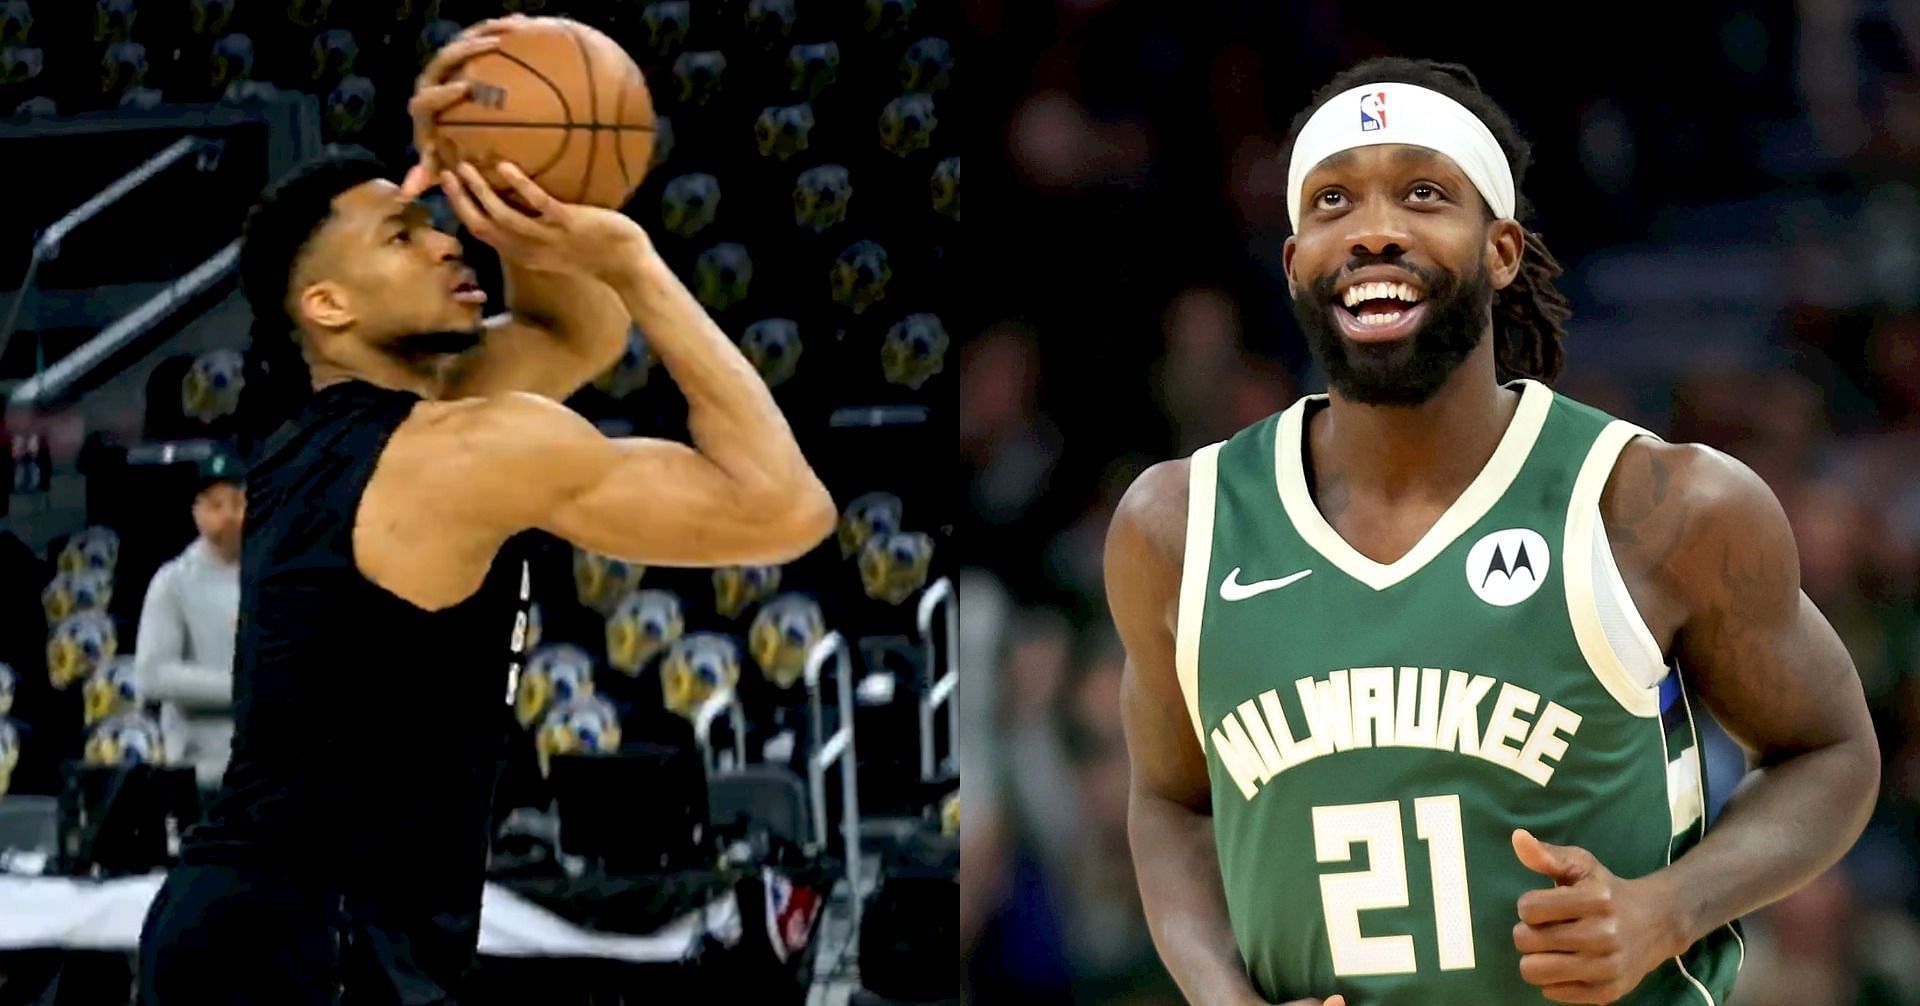 Giannis Antetokounmpo hilariously goes back and forth with Patrick Beverley amid hitting 8 3-pointers